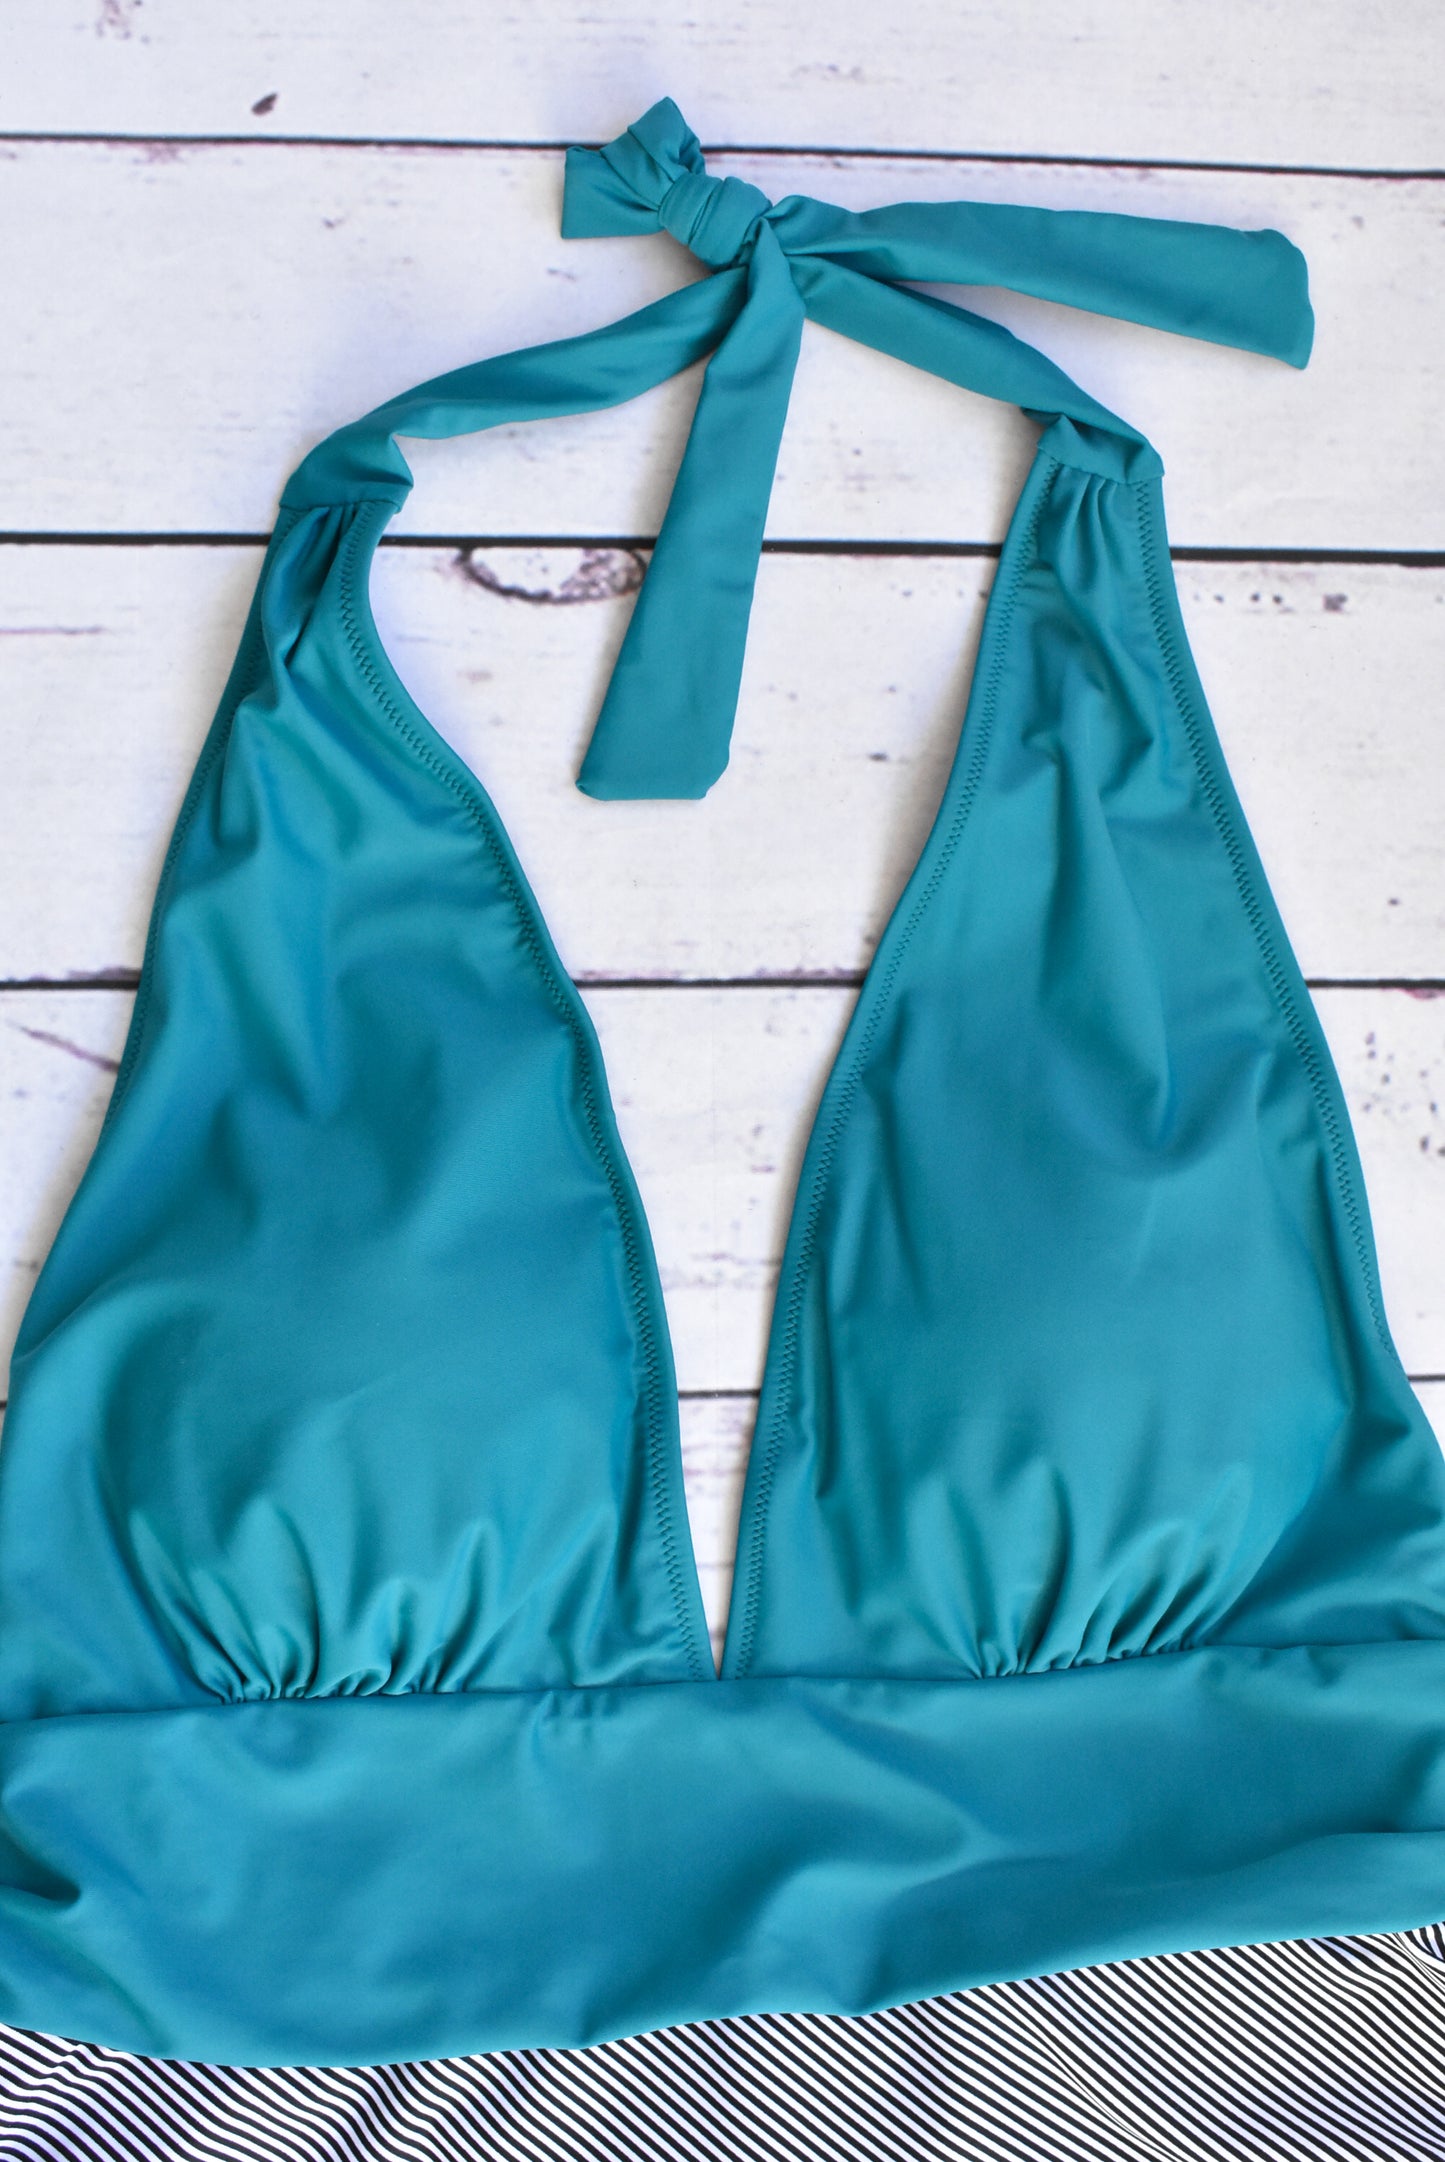 NEW Cupshe turquoise swimsuit, size 3X